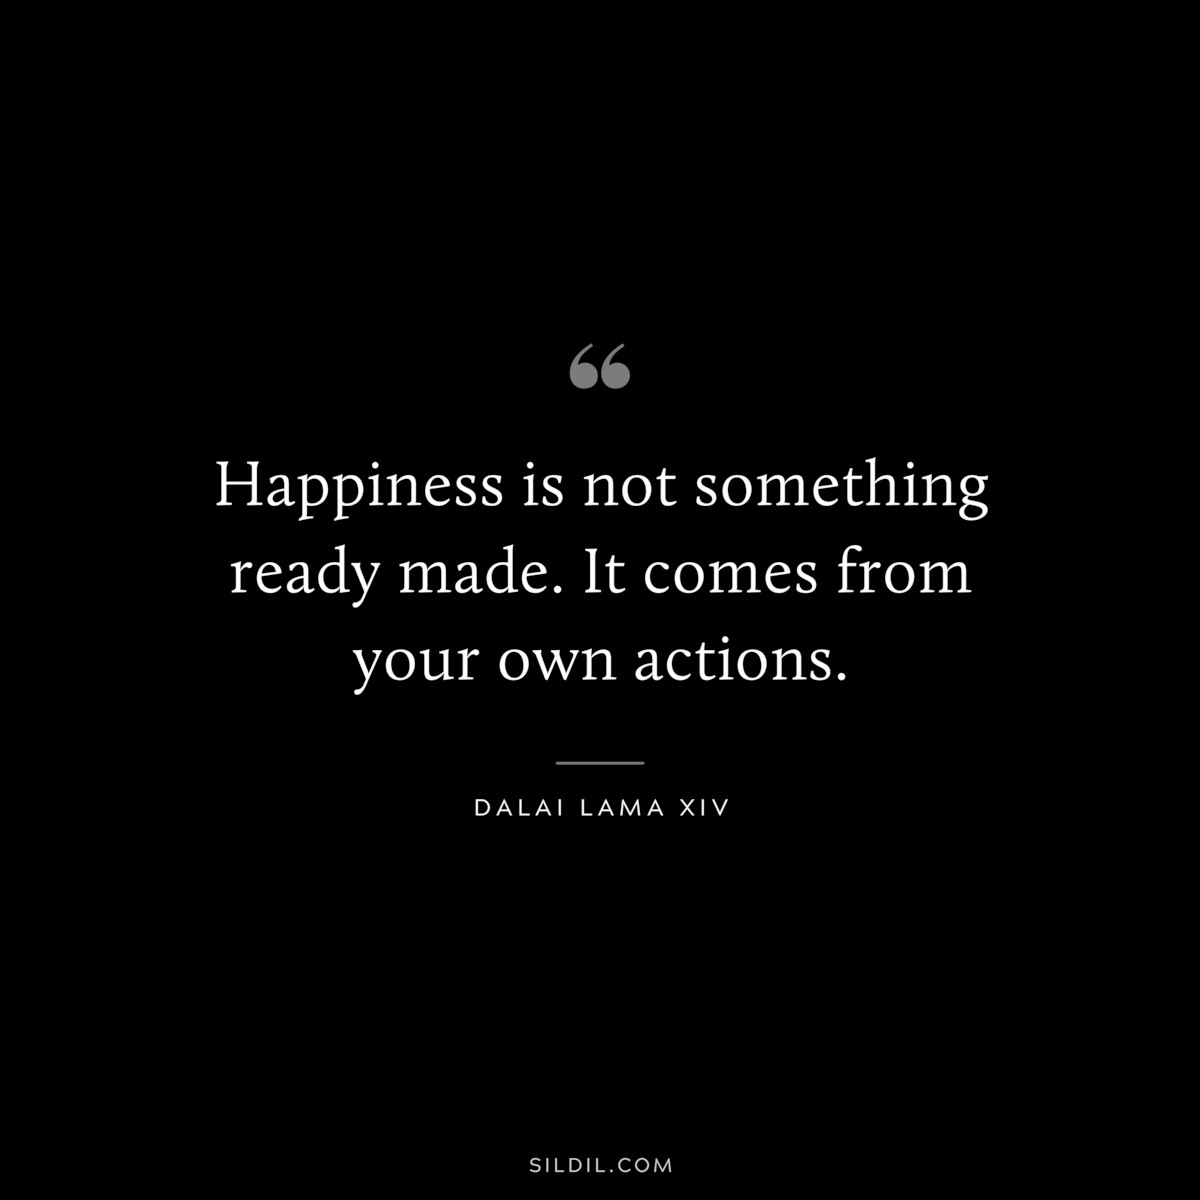 Happiness is not something ready made. It comes from your own actions. ― Dalai Lama XIV